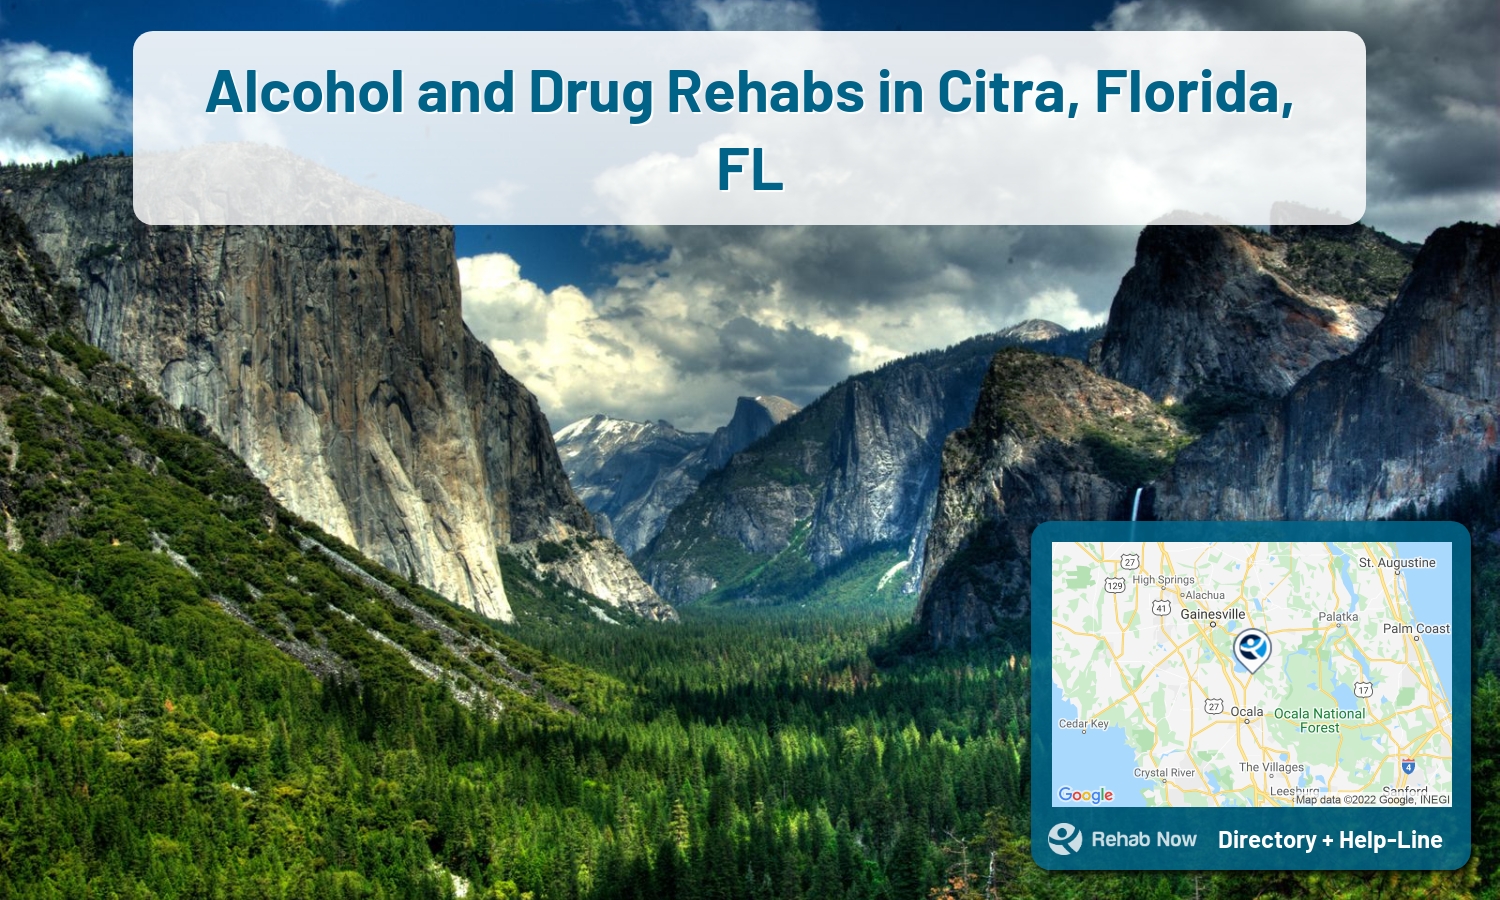 Citra, FL Treatment Centers. Find drug rehab in Citra, Florida, or detox and treatment programs. Get the right help now!